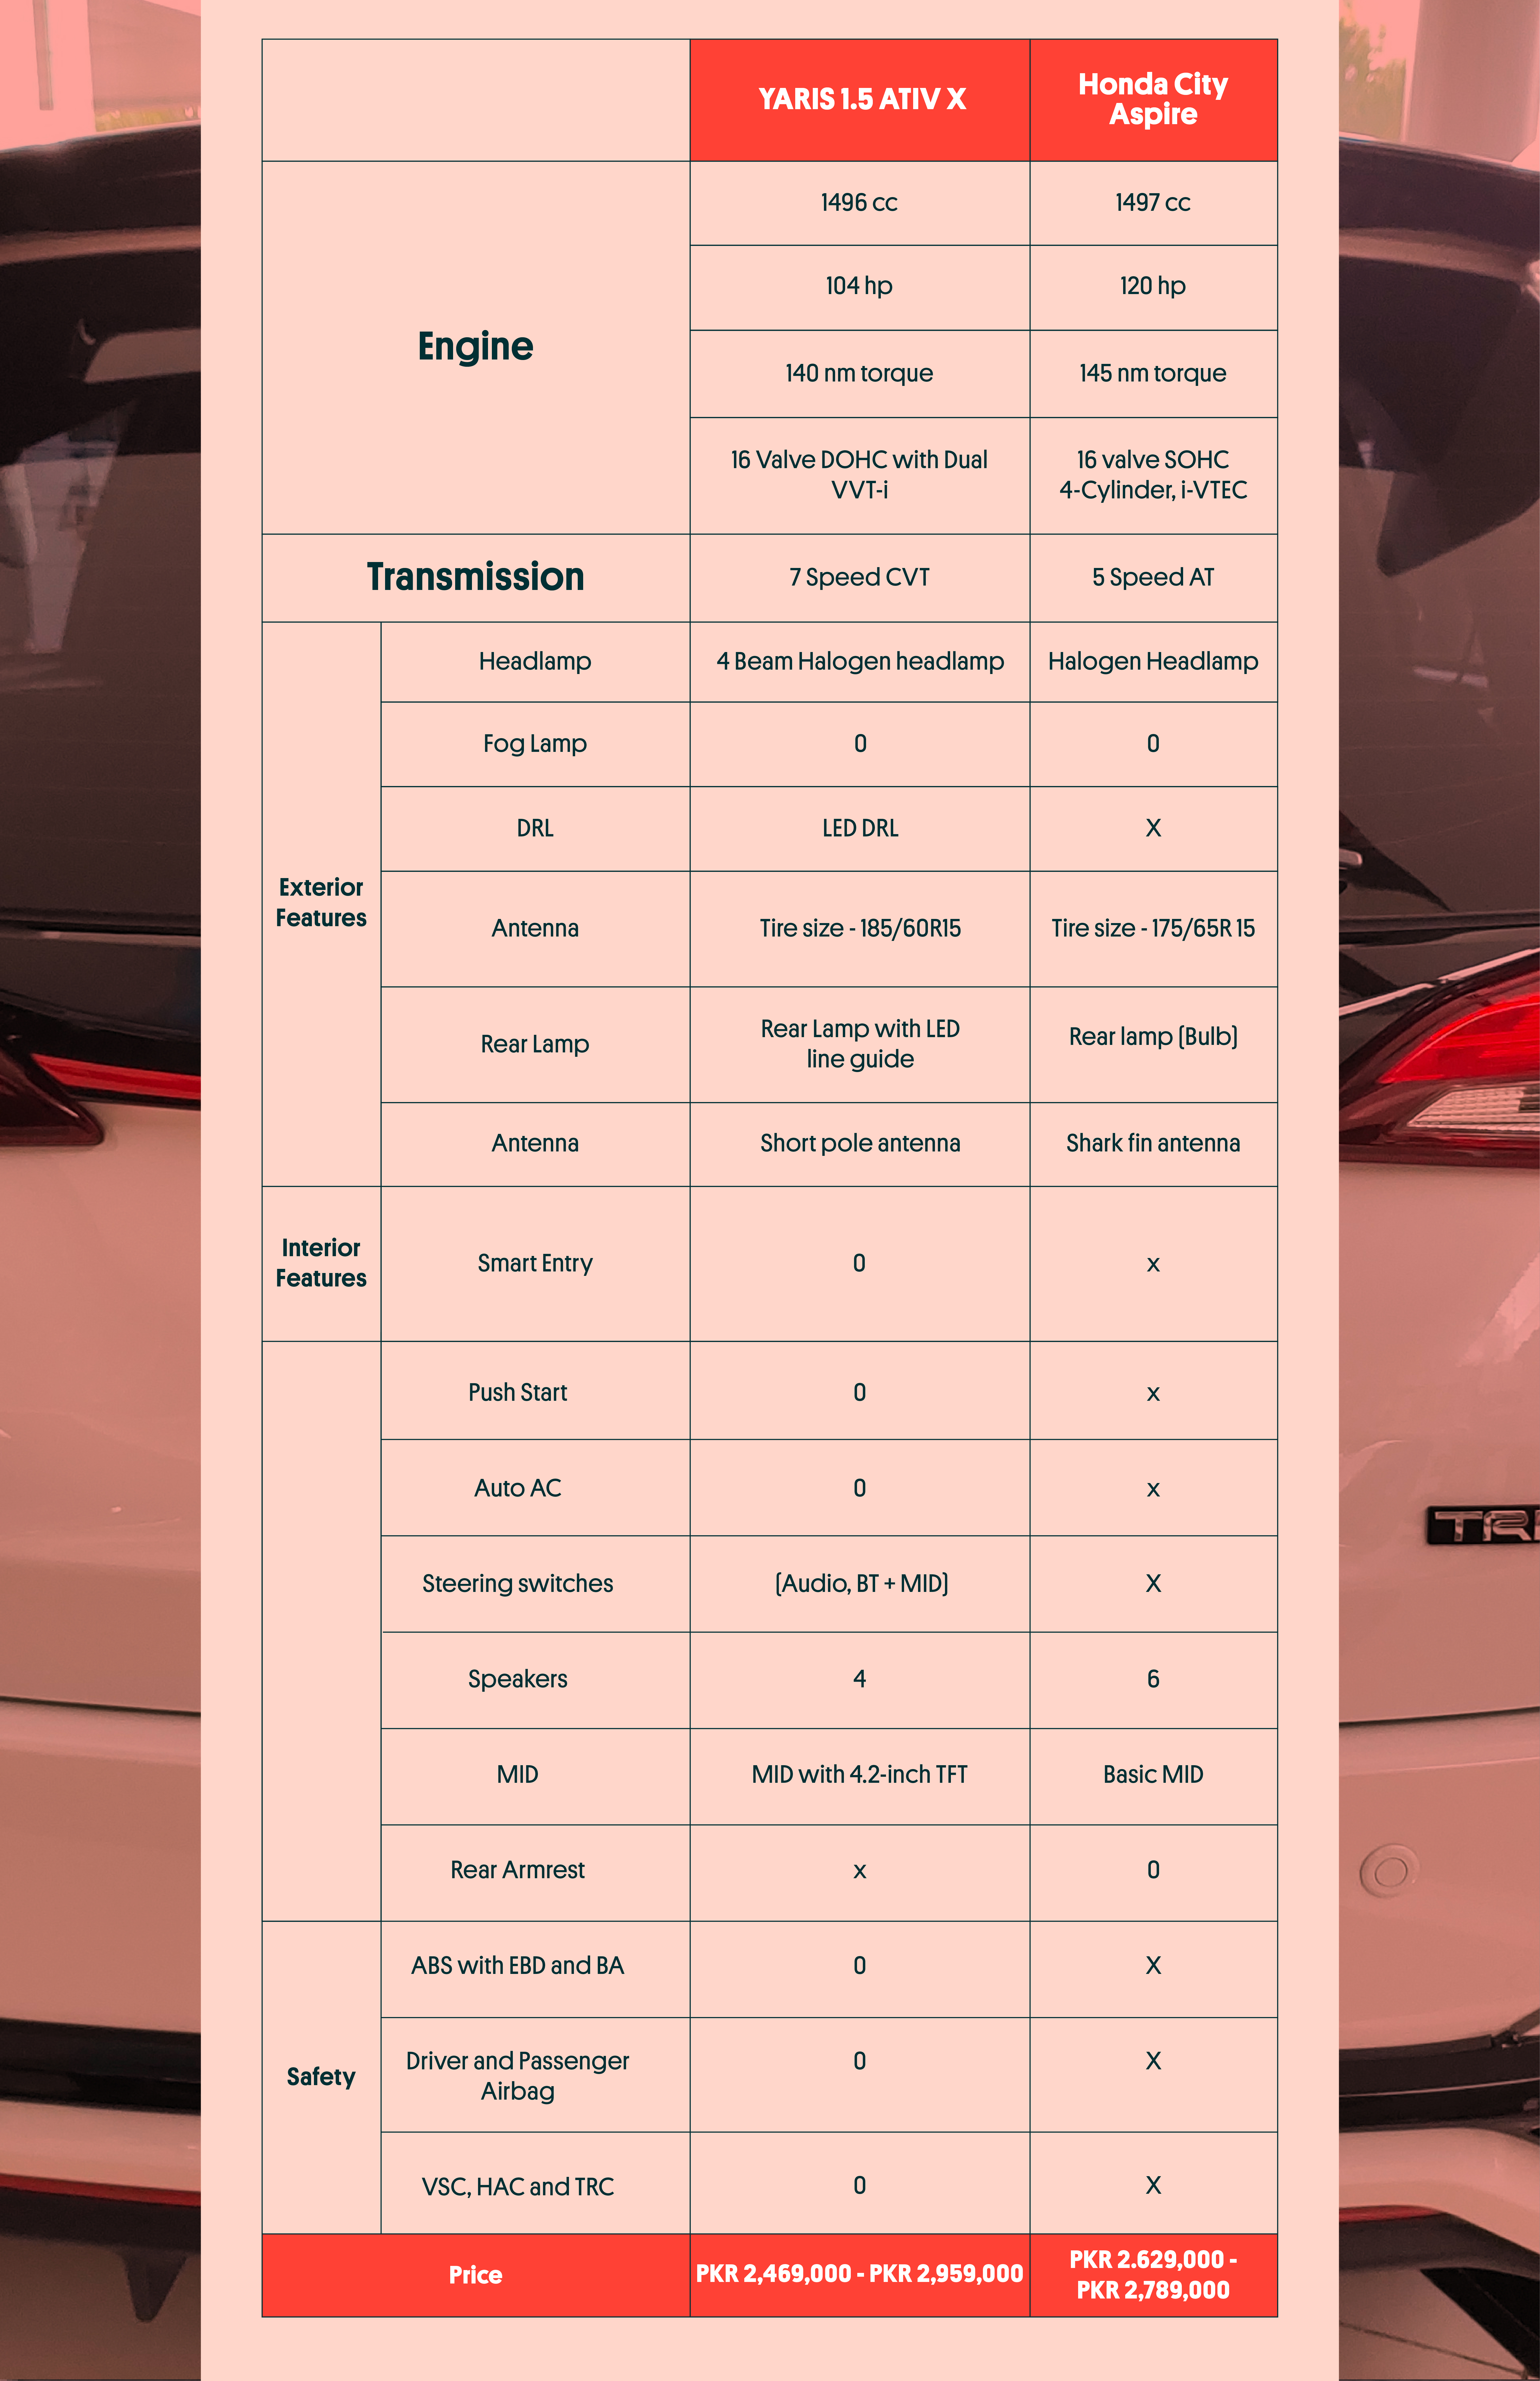 Table comparing the differences between the Toyota Yaris and Honda City Asprire.